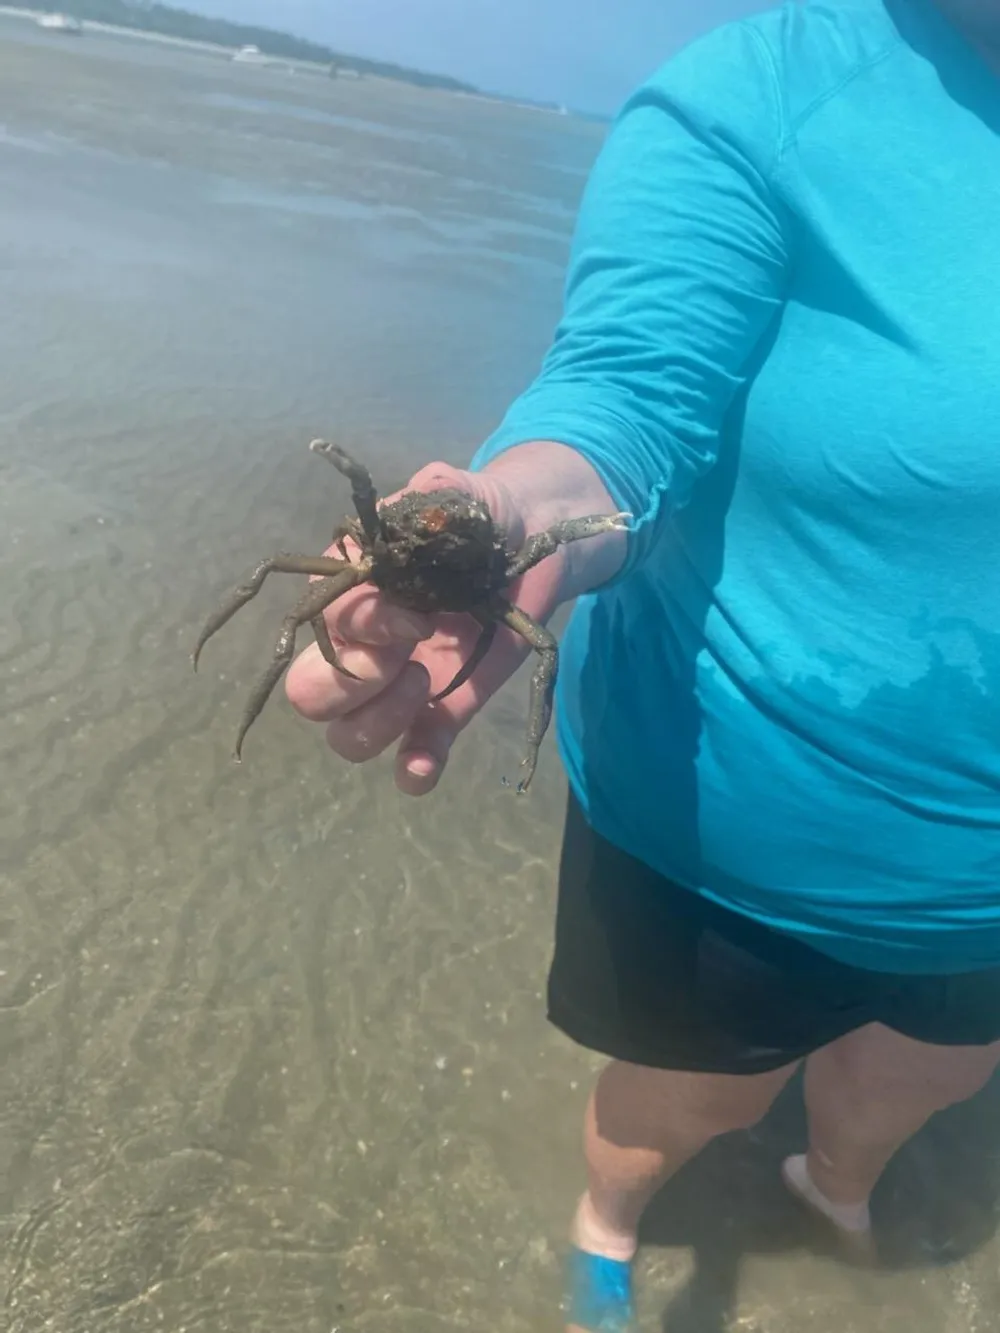 A person in a blue top is holding a large crab at a sandy beach